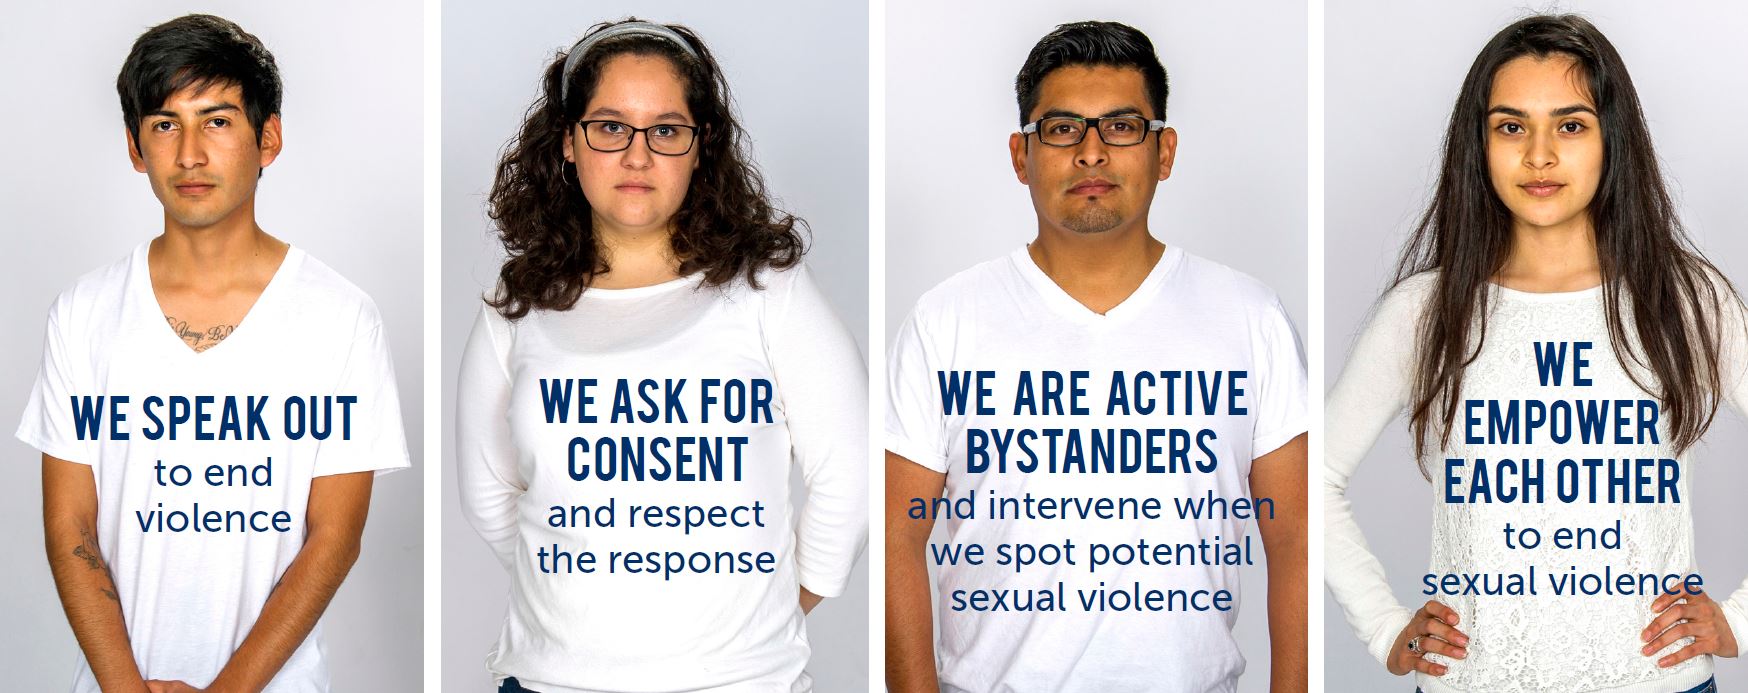 AHC Students against sexual assault